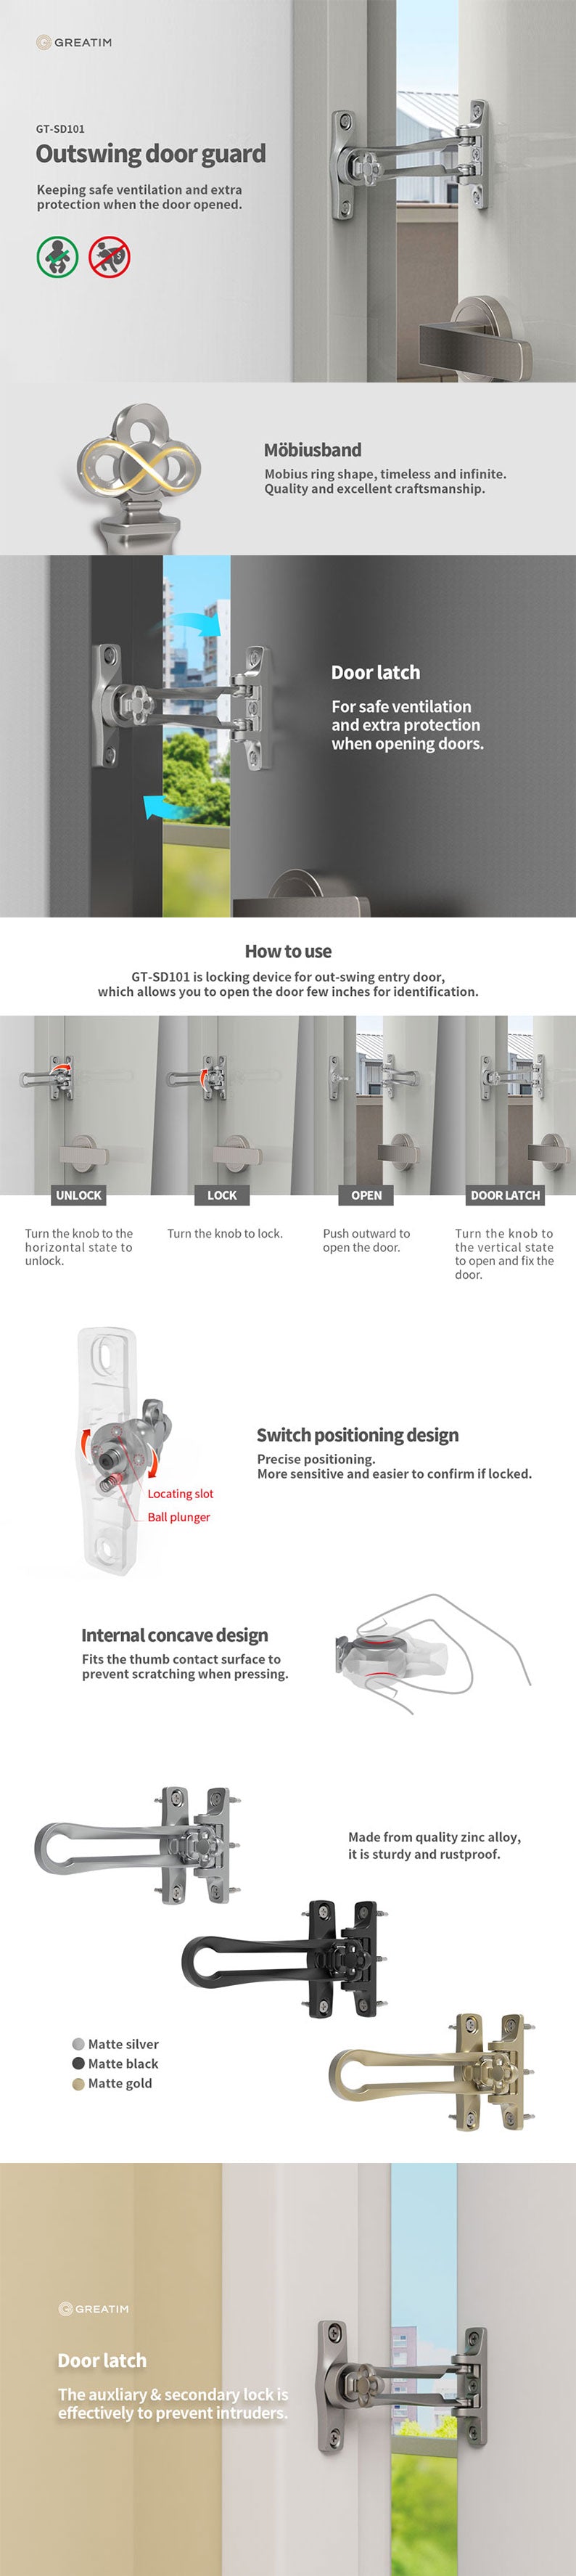 Greatim Outswing Door Guard SD101 -The locking device for out-swing entry door, which allows you to open the door few inches for indentification.